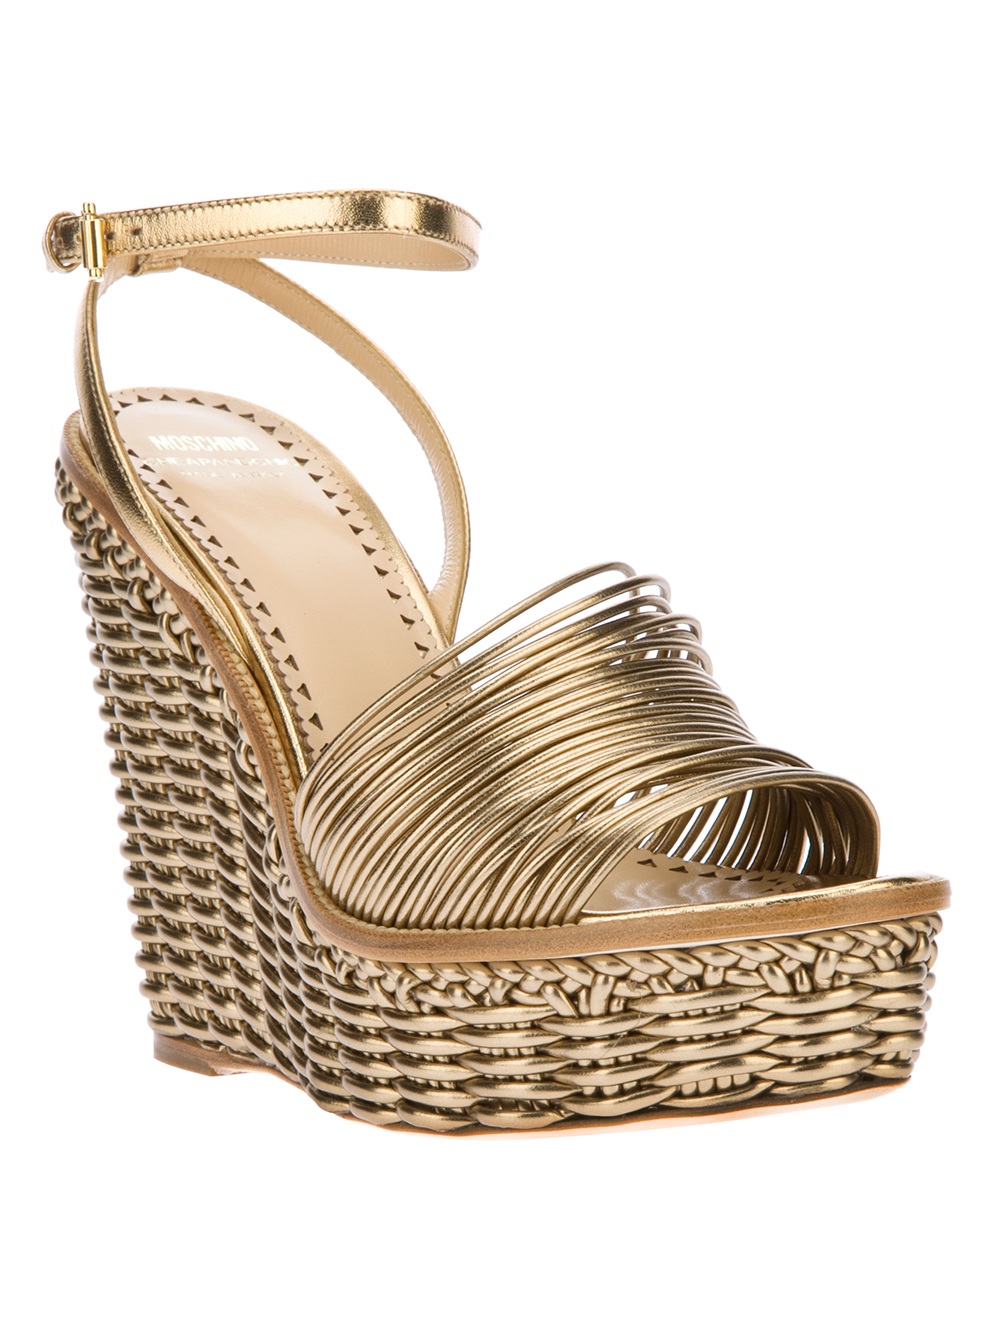 Moschino Cheap & Chic Woven Wedge Sandal in Gold | Lyst